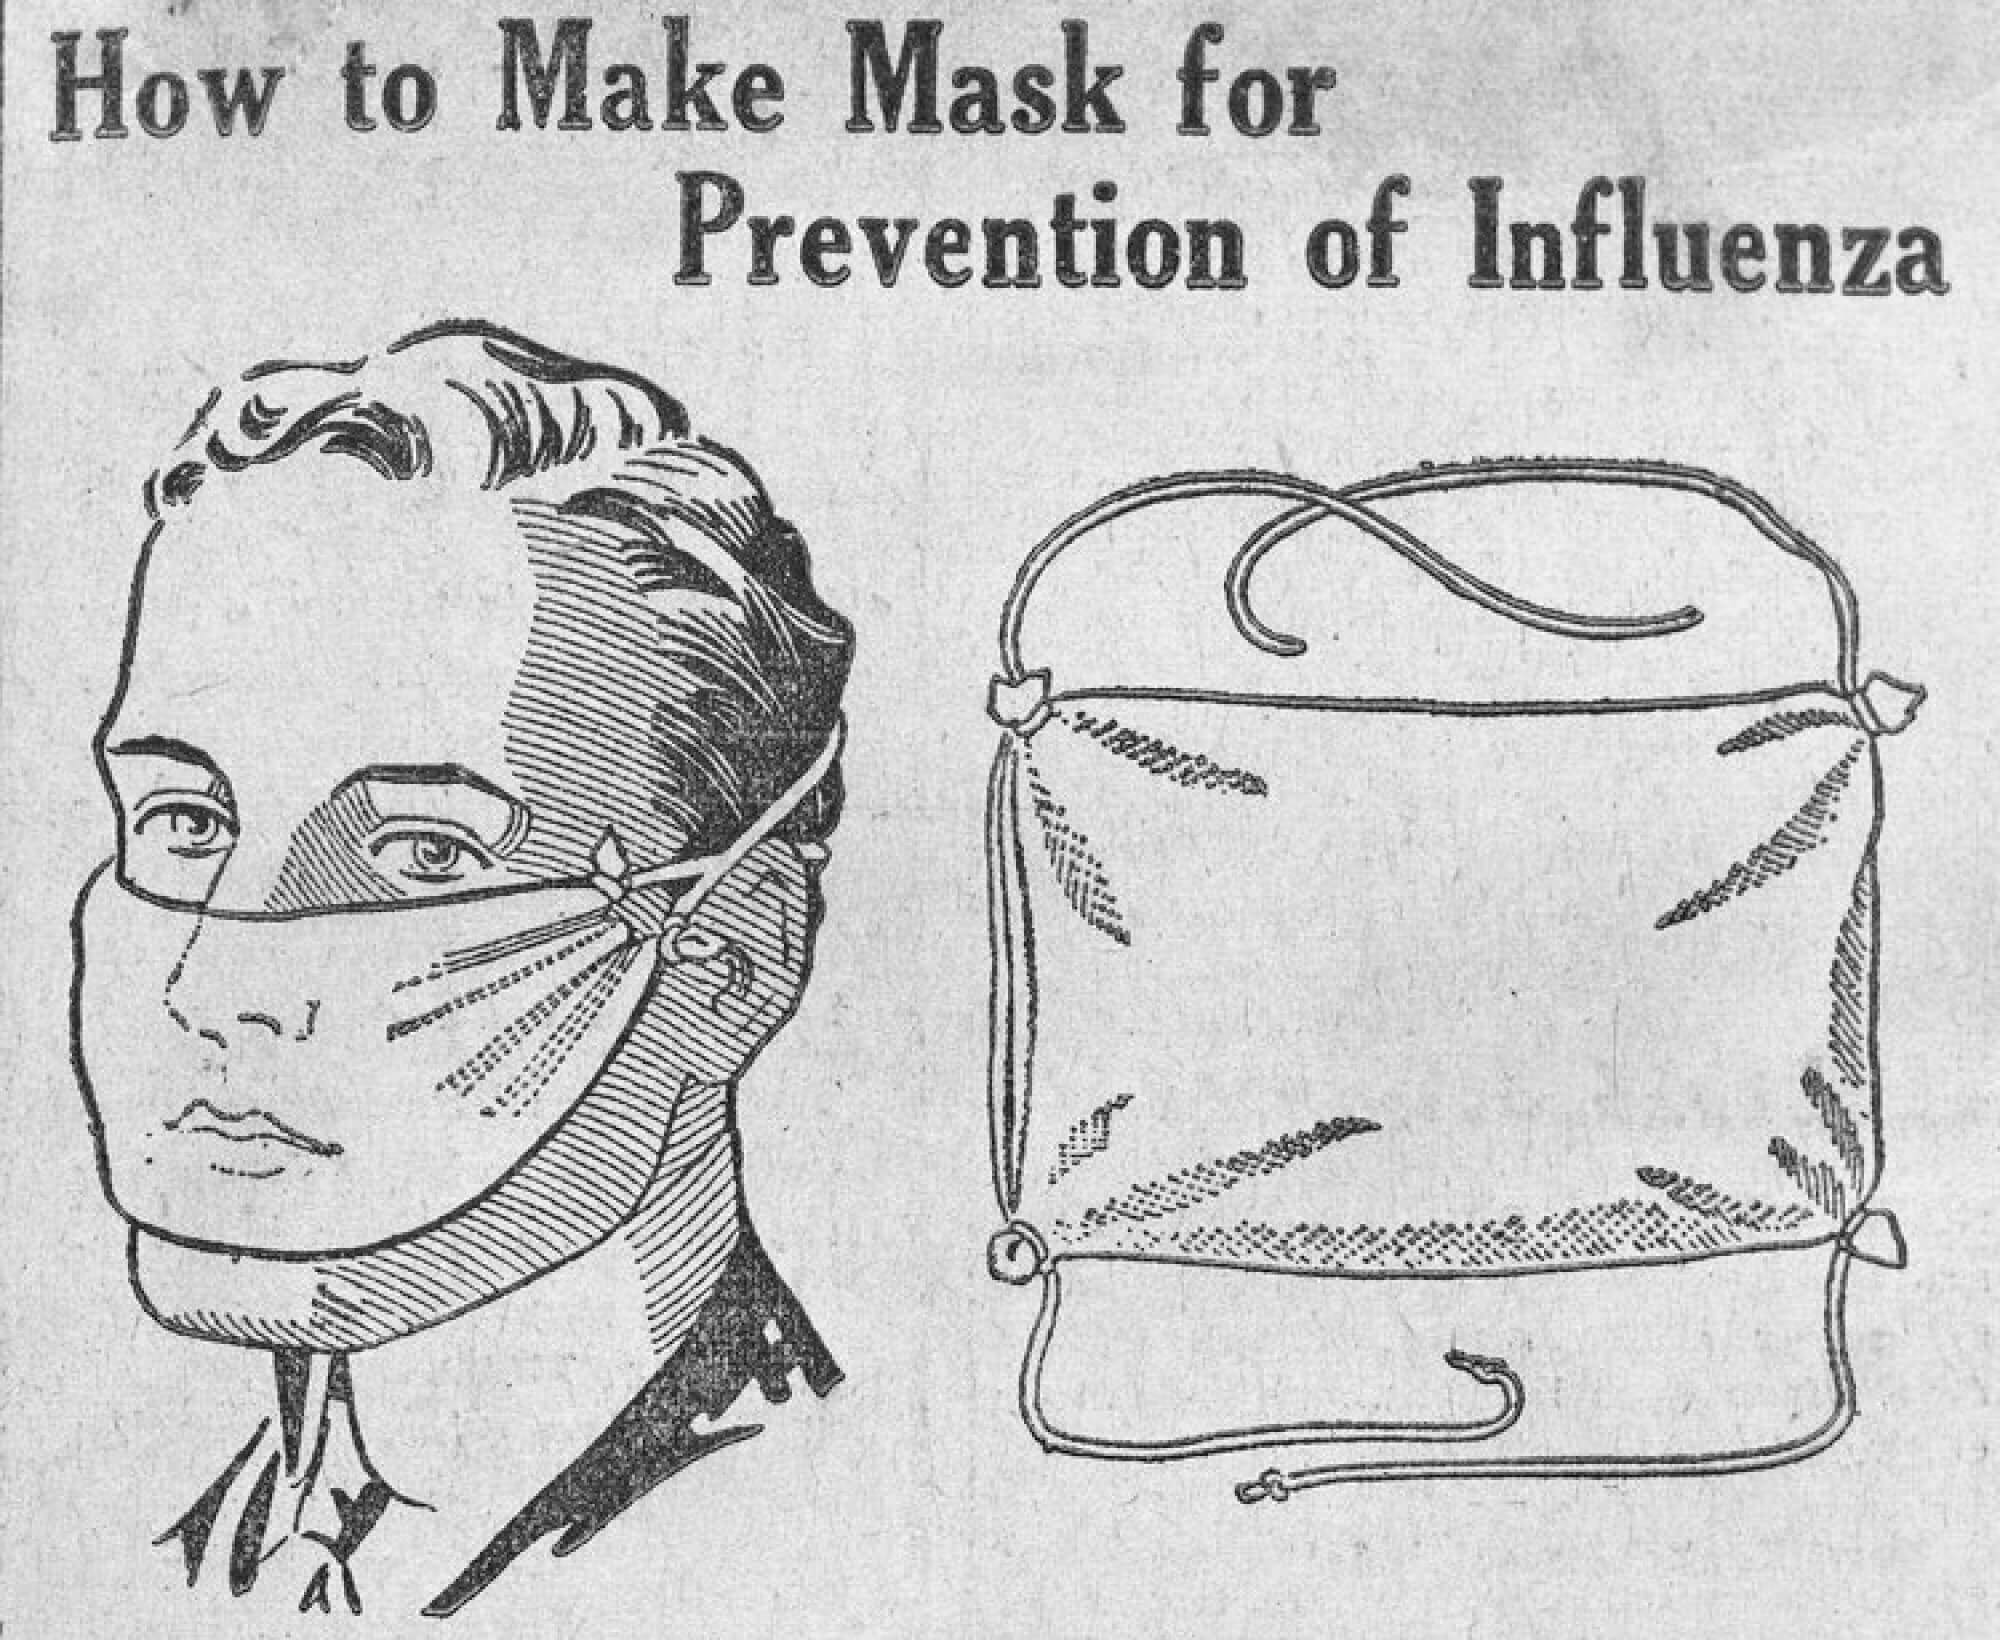 Government bulletin titled "How to make mask for prevention of influenza". Depicts drawing of man (from neck up) wearing a mask, and the mask itself to the right. Instructions are provided in the text below.